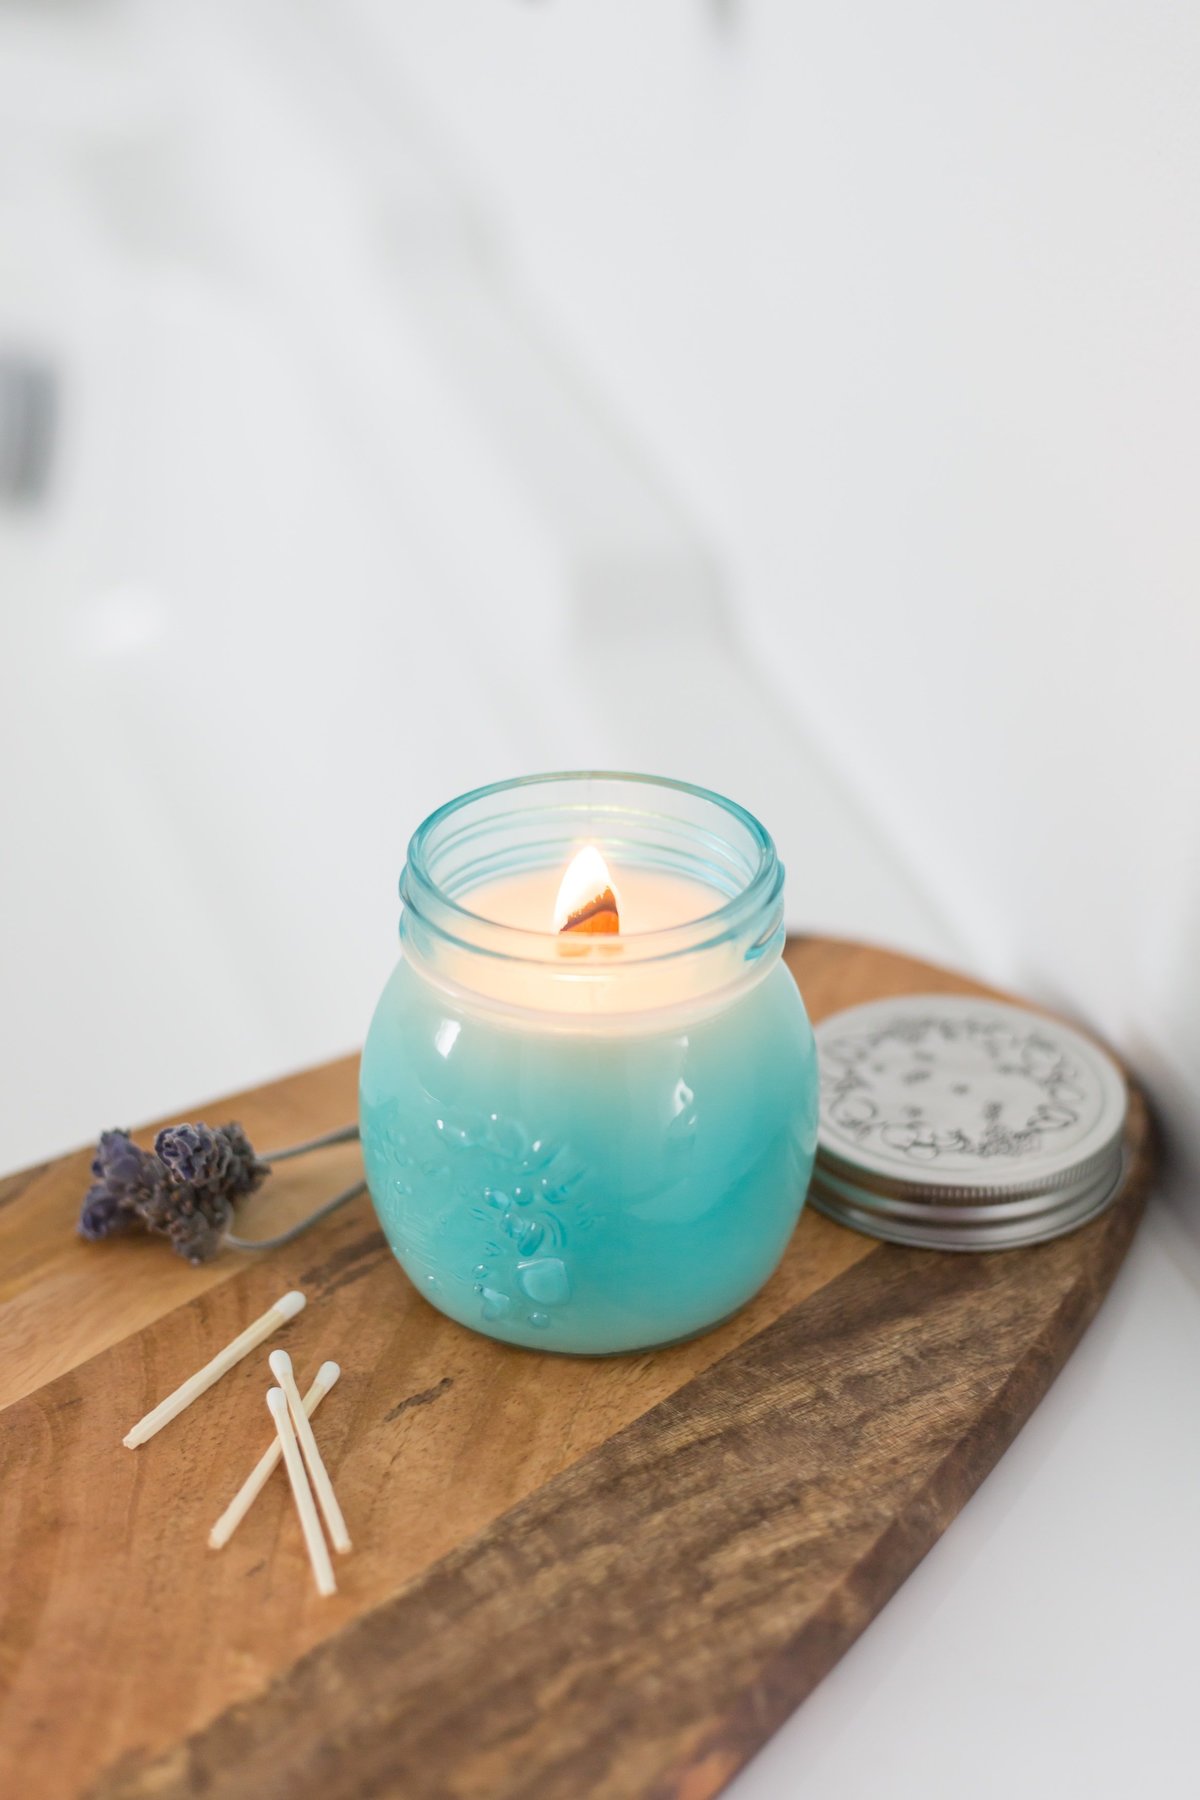 Atelier21 Co - Country Candle-020